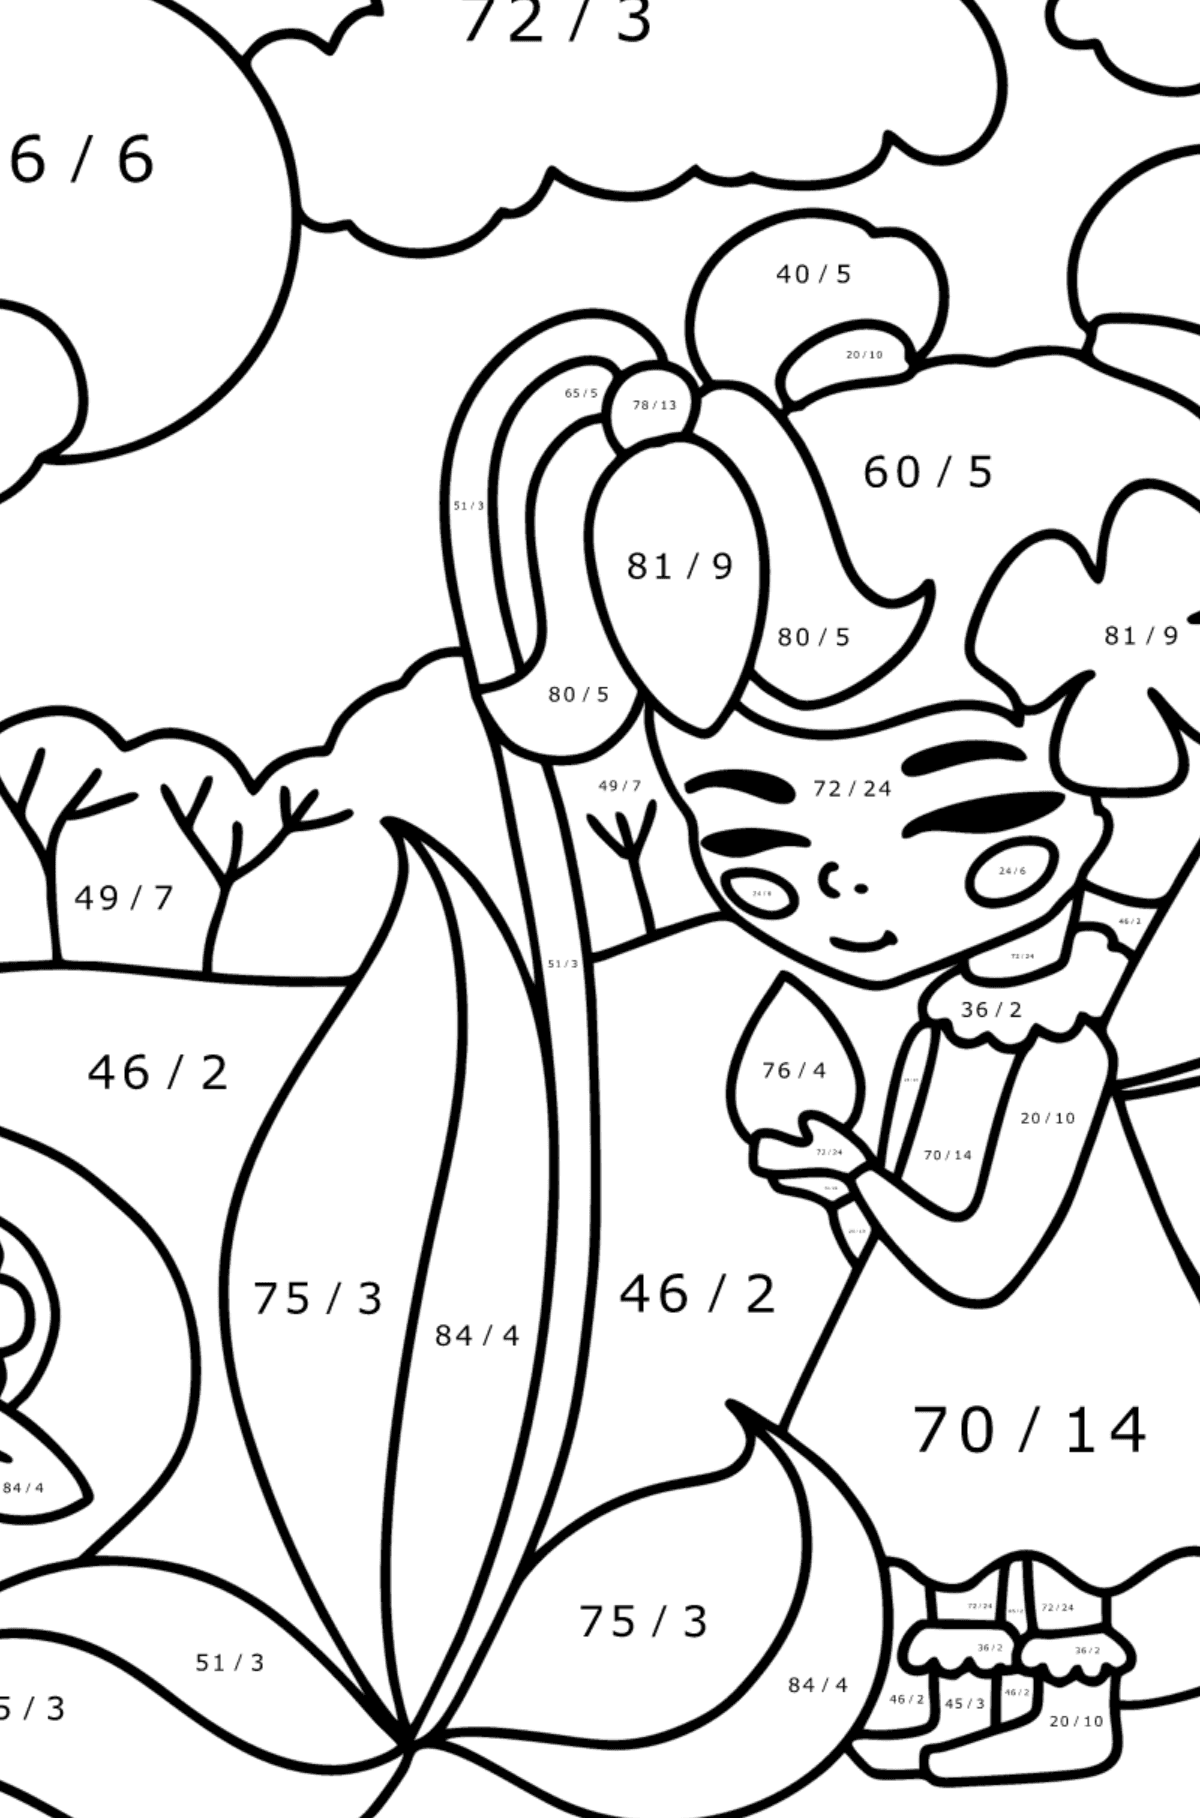 Fairy on a forest path coloring page - Math Coloring - Division for Kids